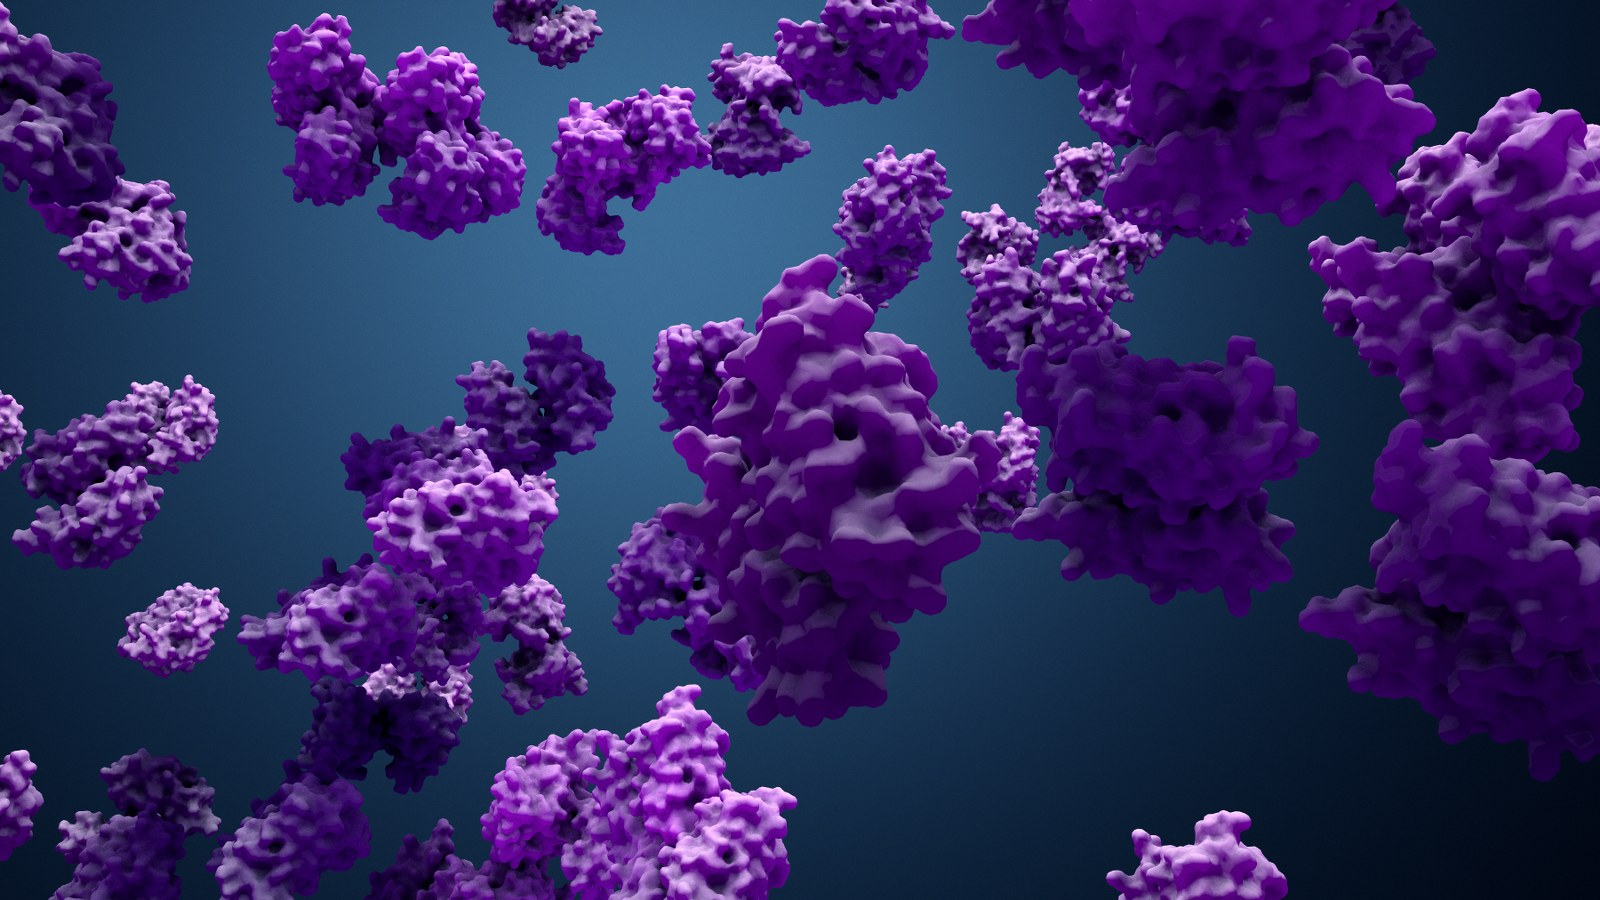 purple proteins on a dar blue background